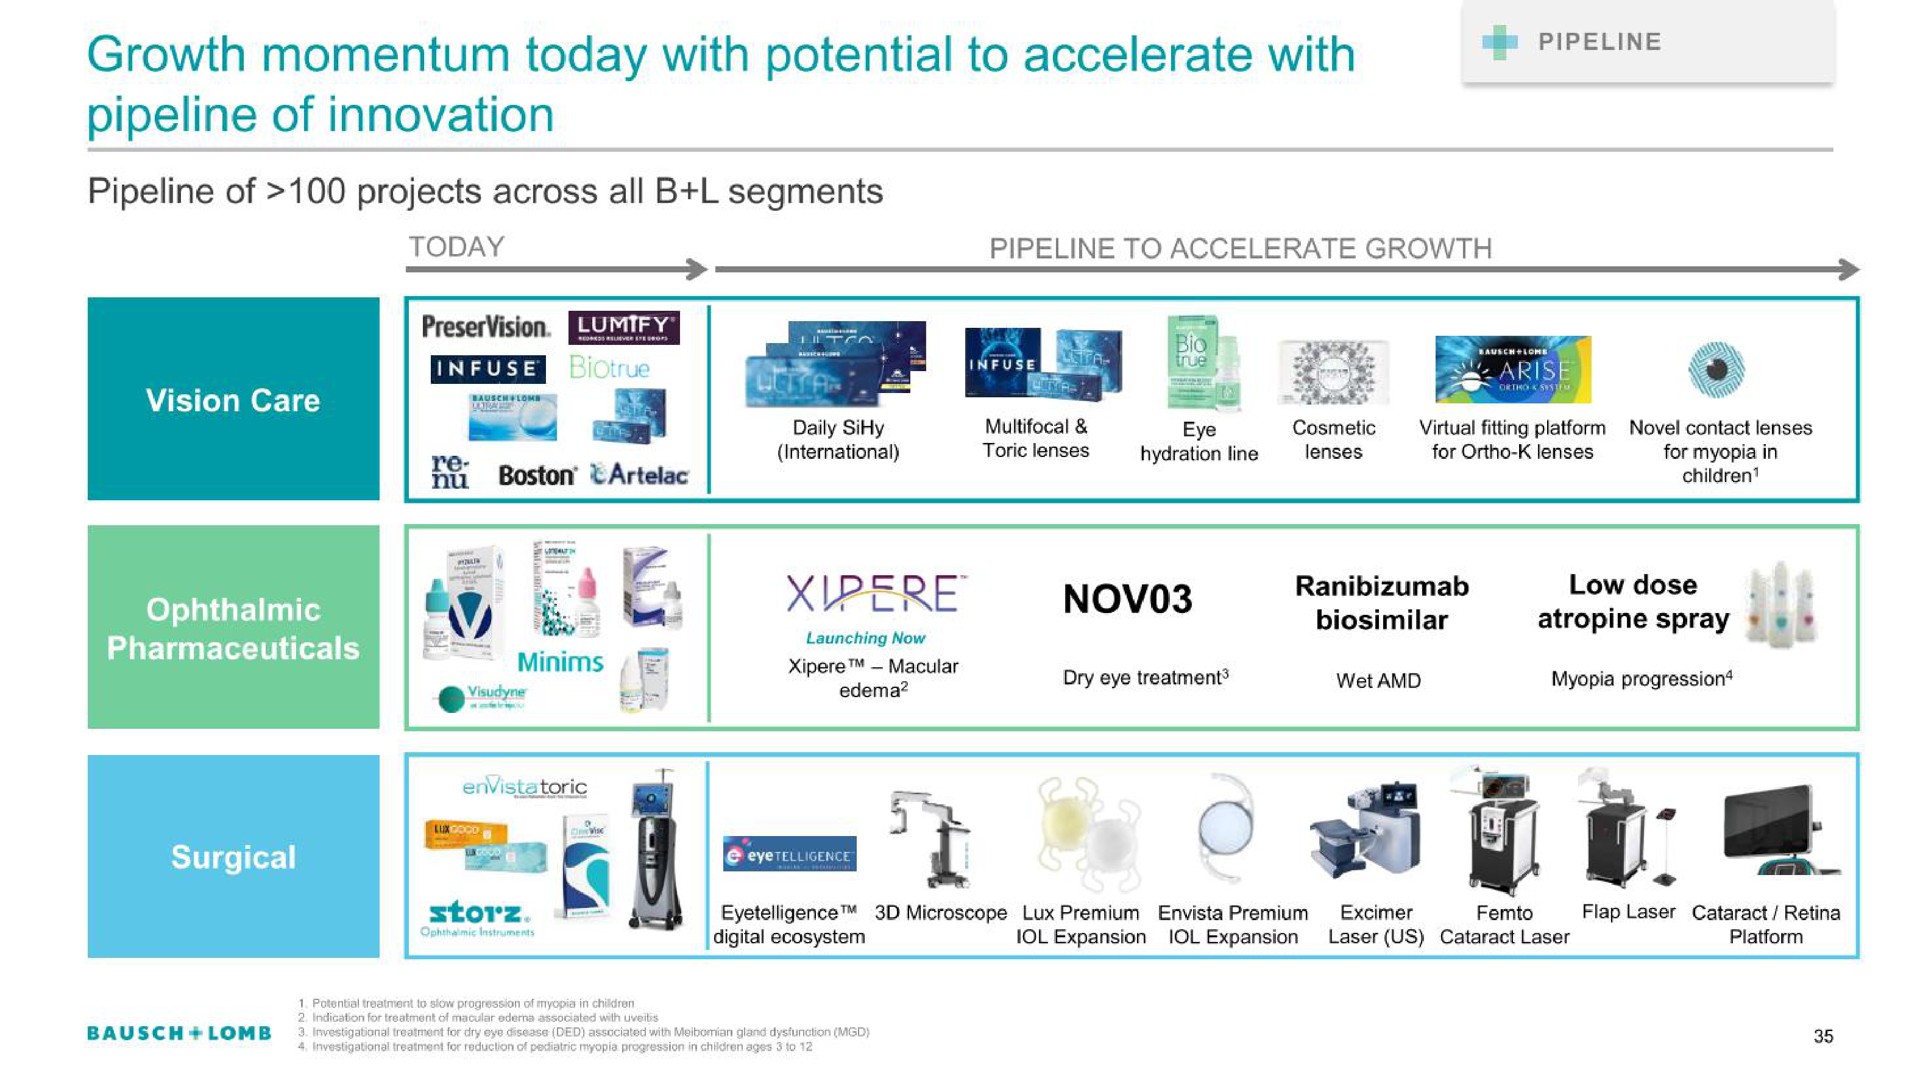 growth momentum today with potential to accelerate with pipeline of innovation | Bausch+Lomb